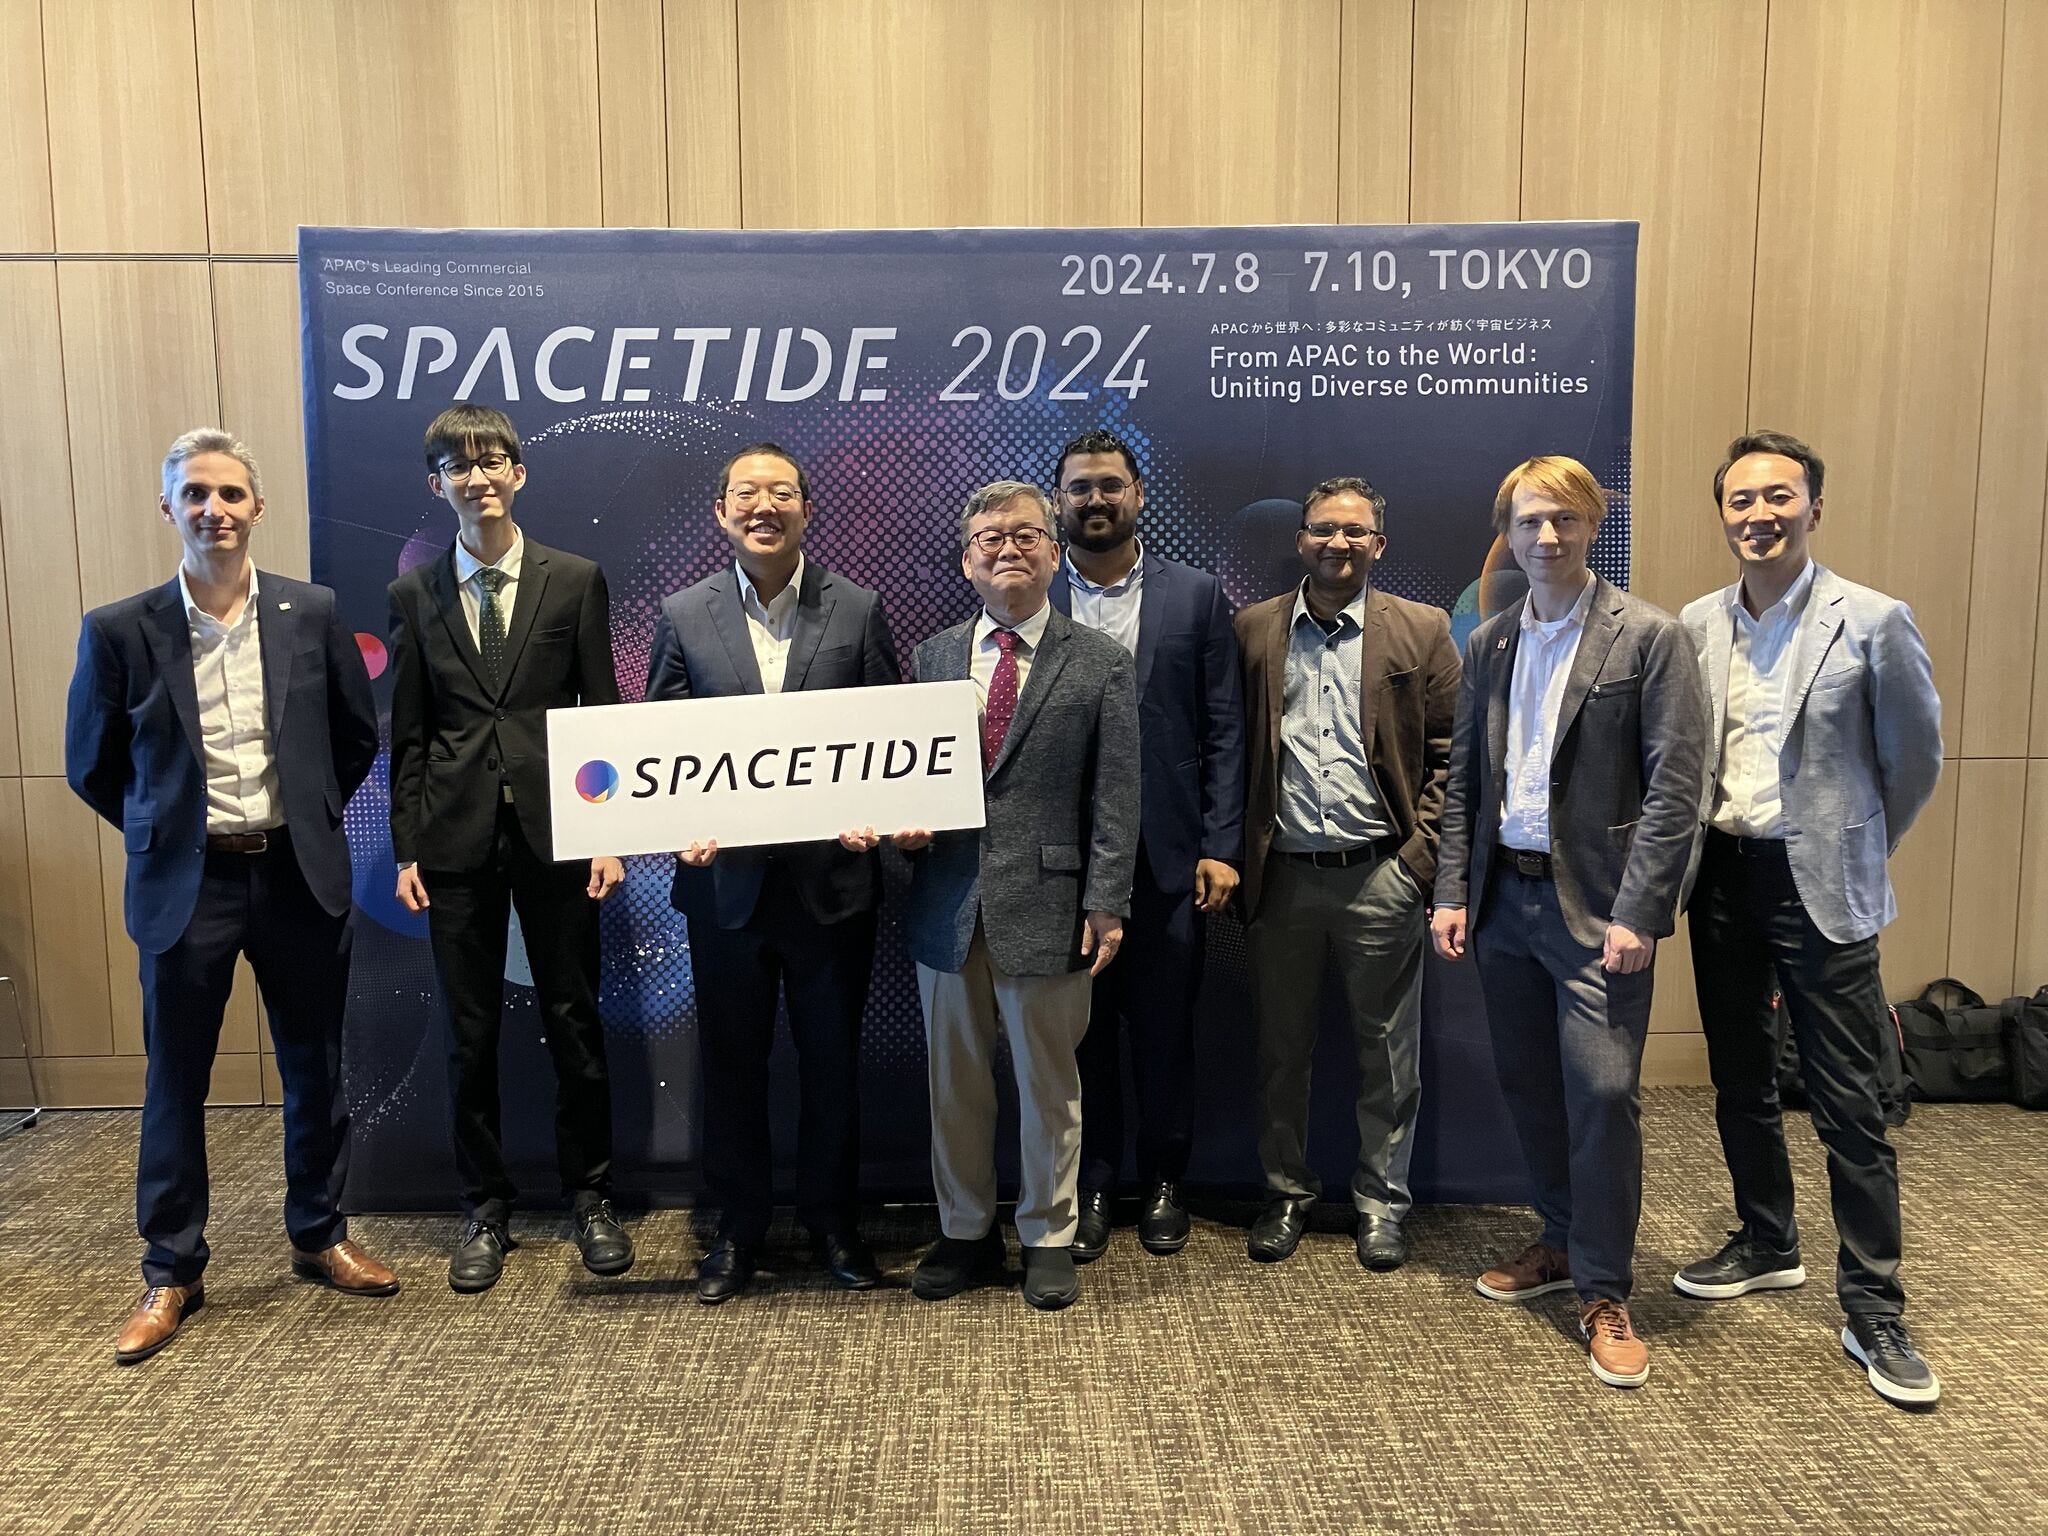 Emerging Space Trends from SPACETIDE2024